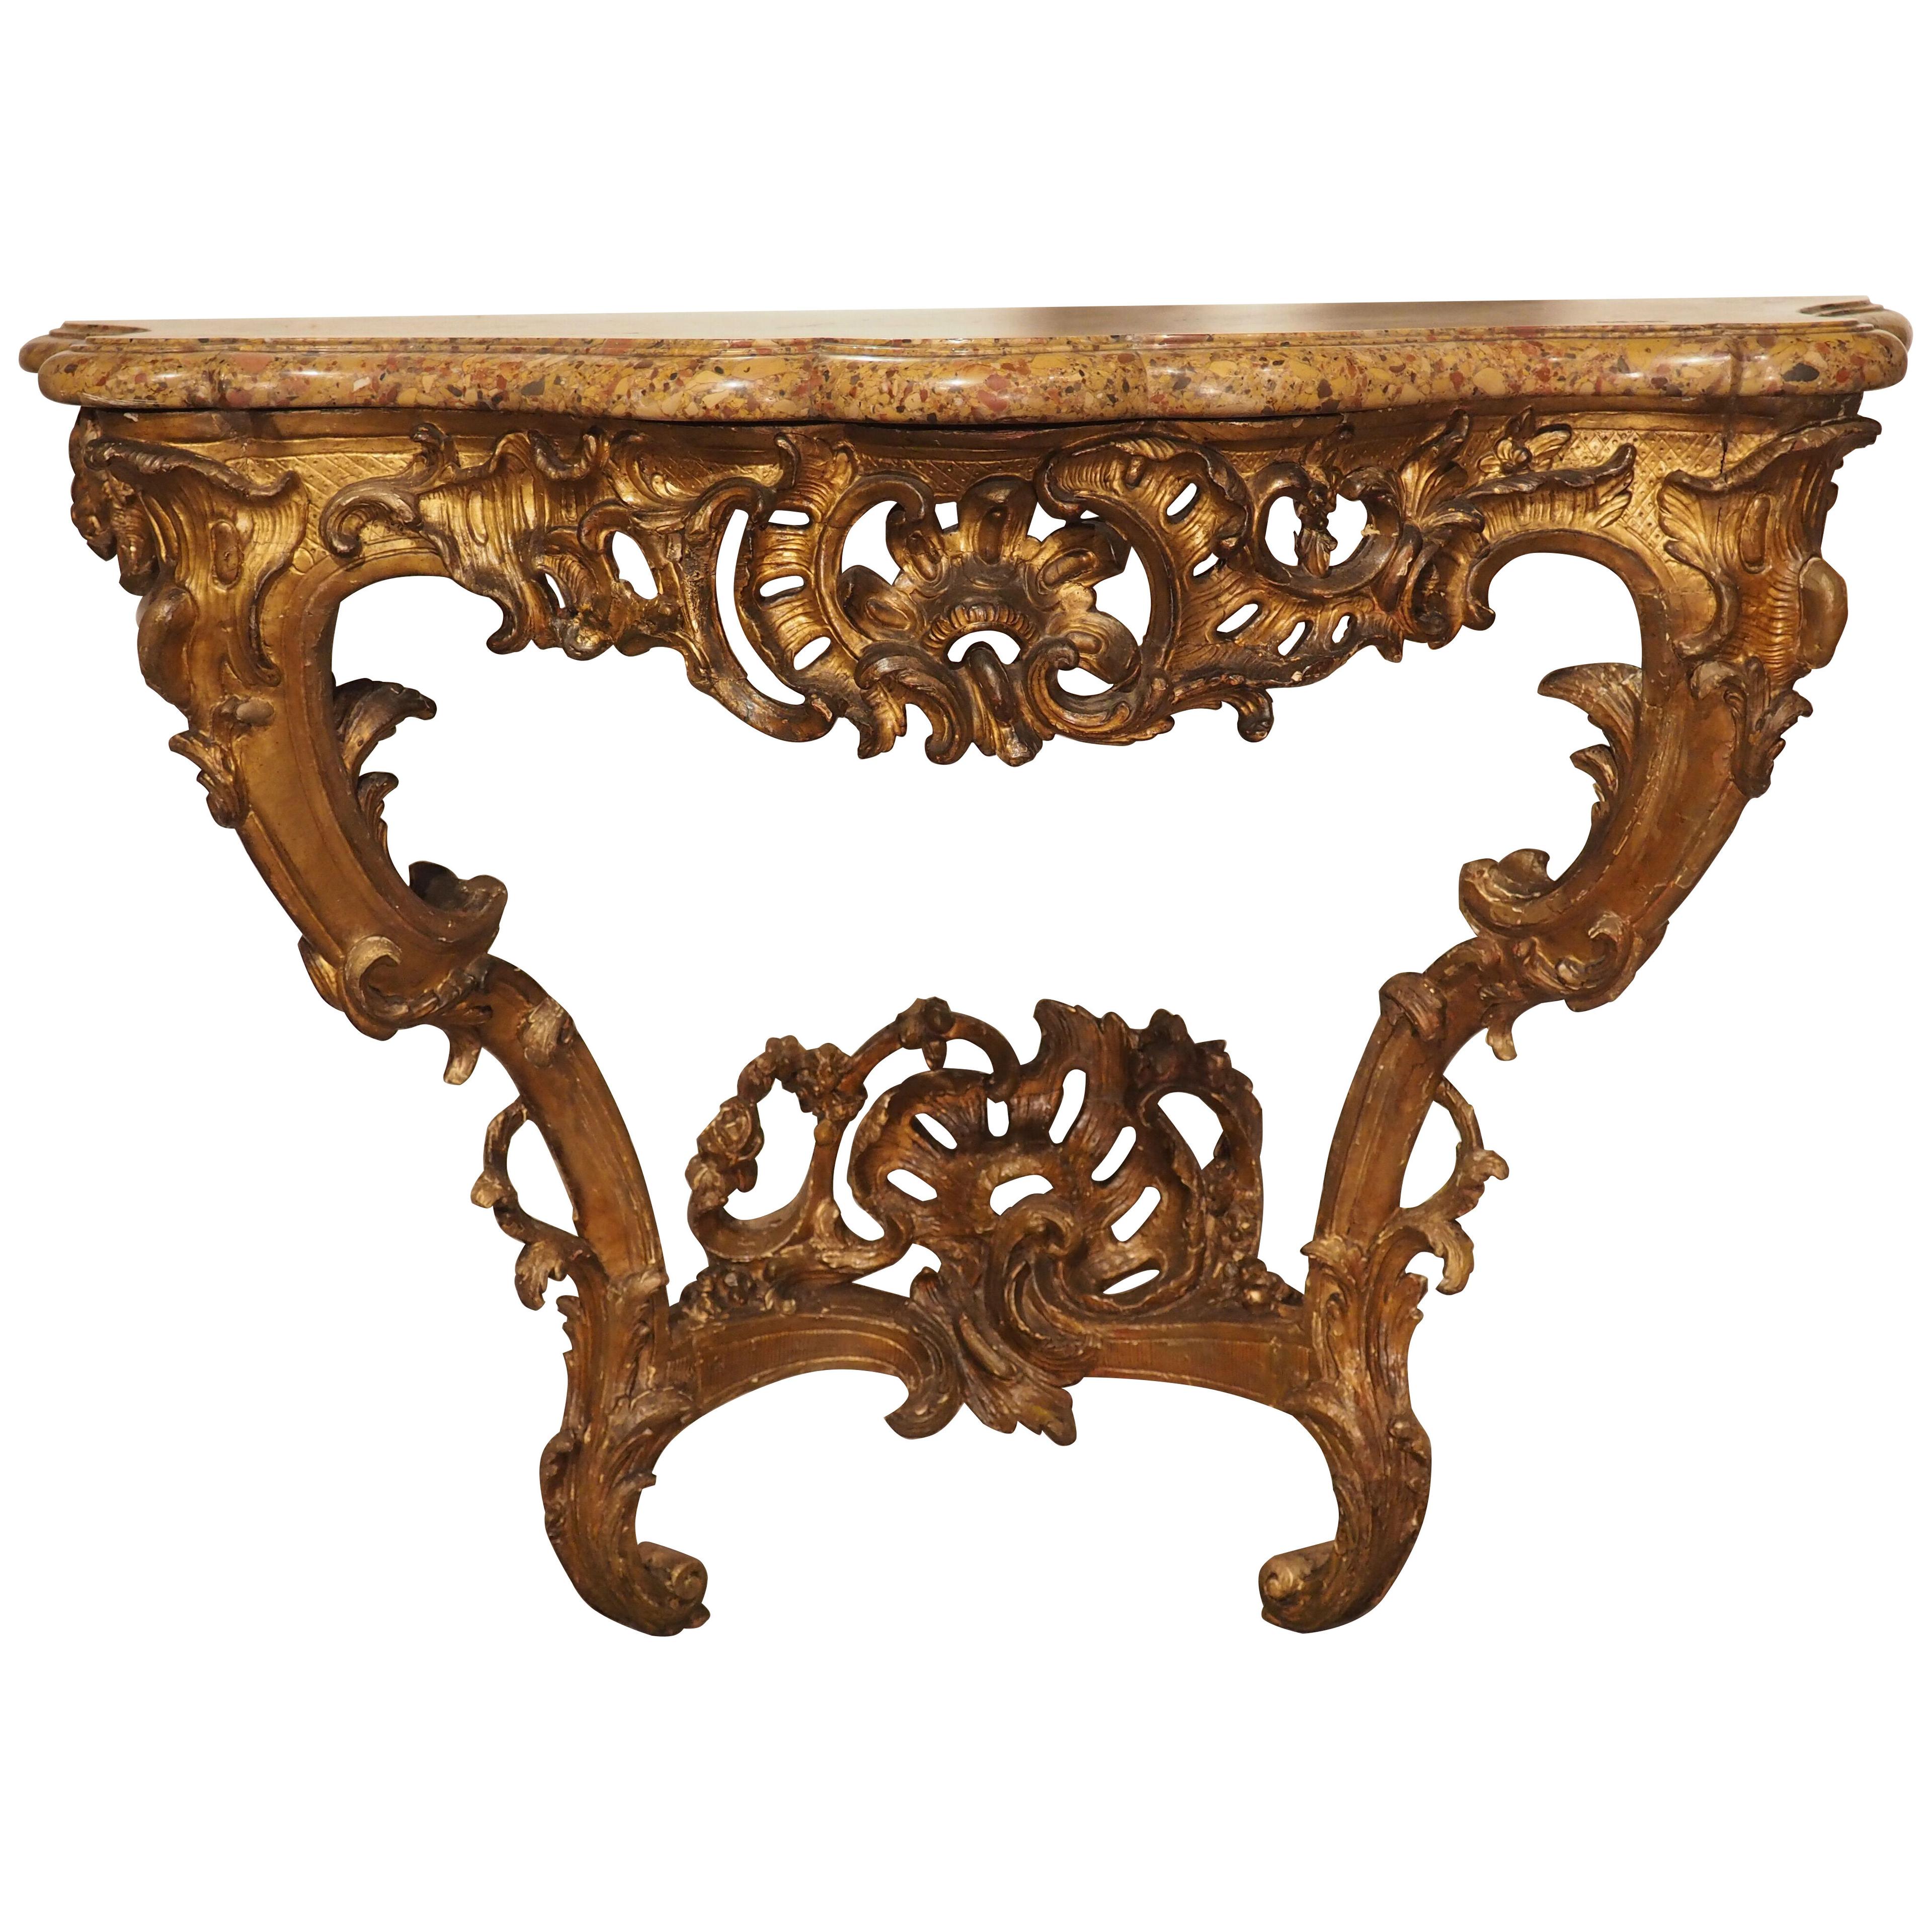 Louis XV Giltwood and Breche D’Alep Marble Console Table from France, Circa 1750